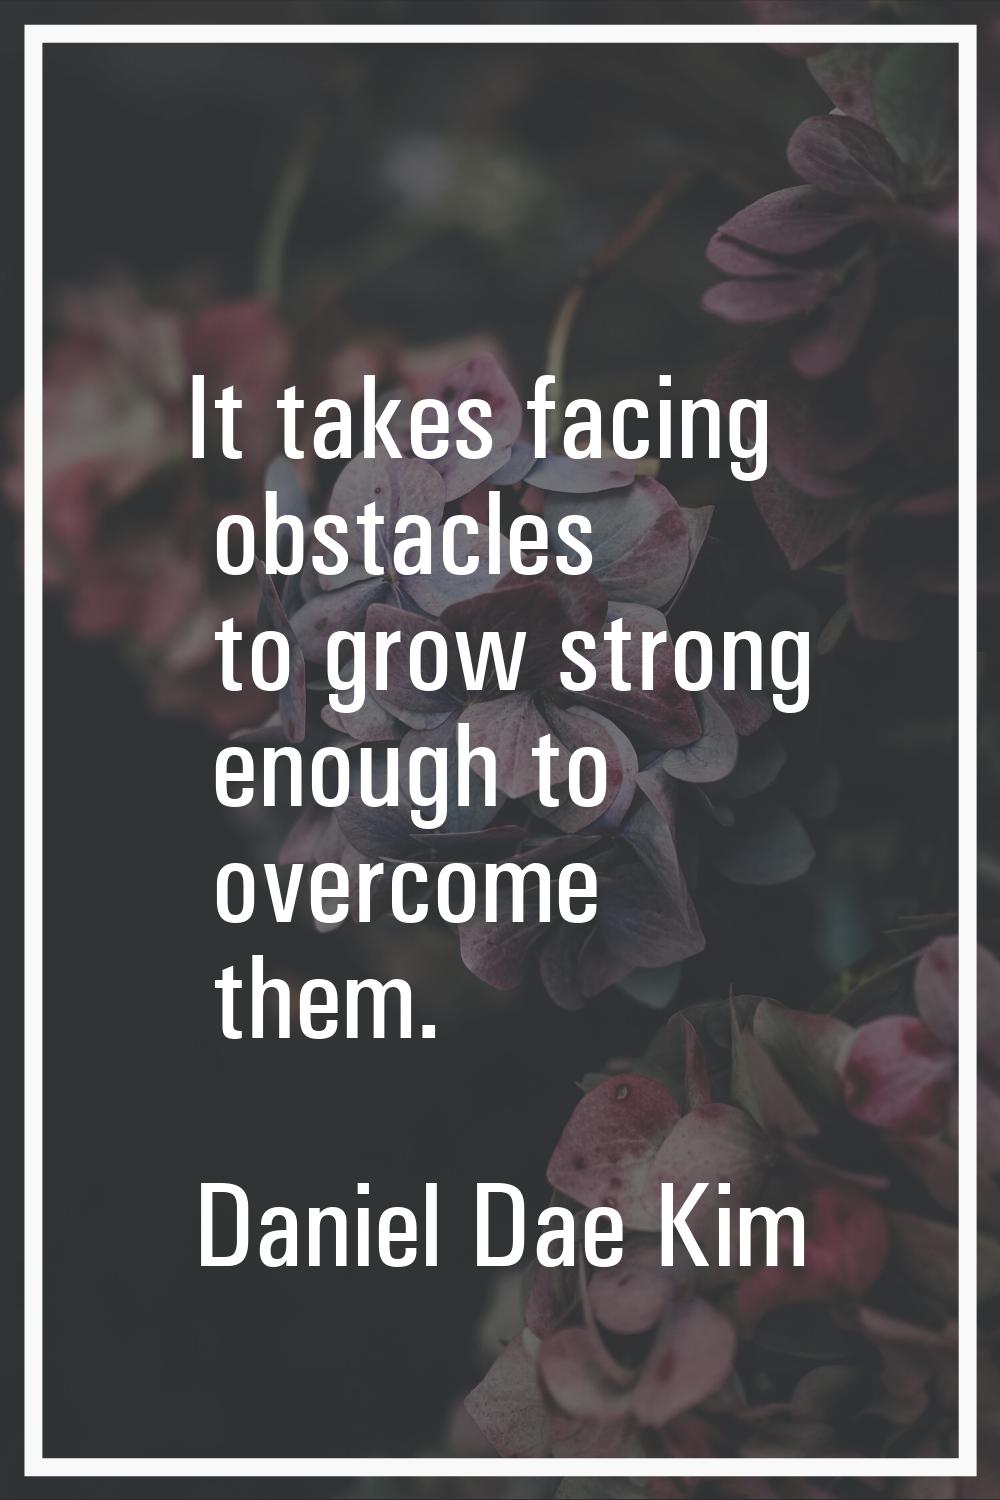 It takes facing obstacles to grow strong enough to overcome them.